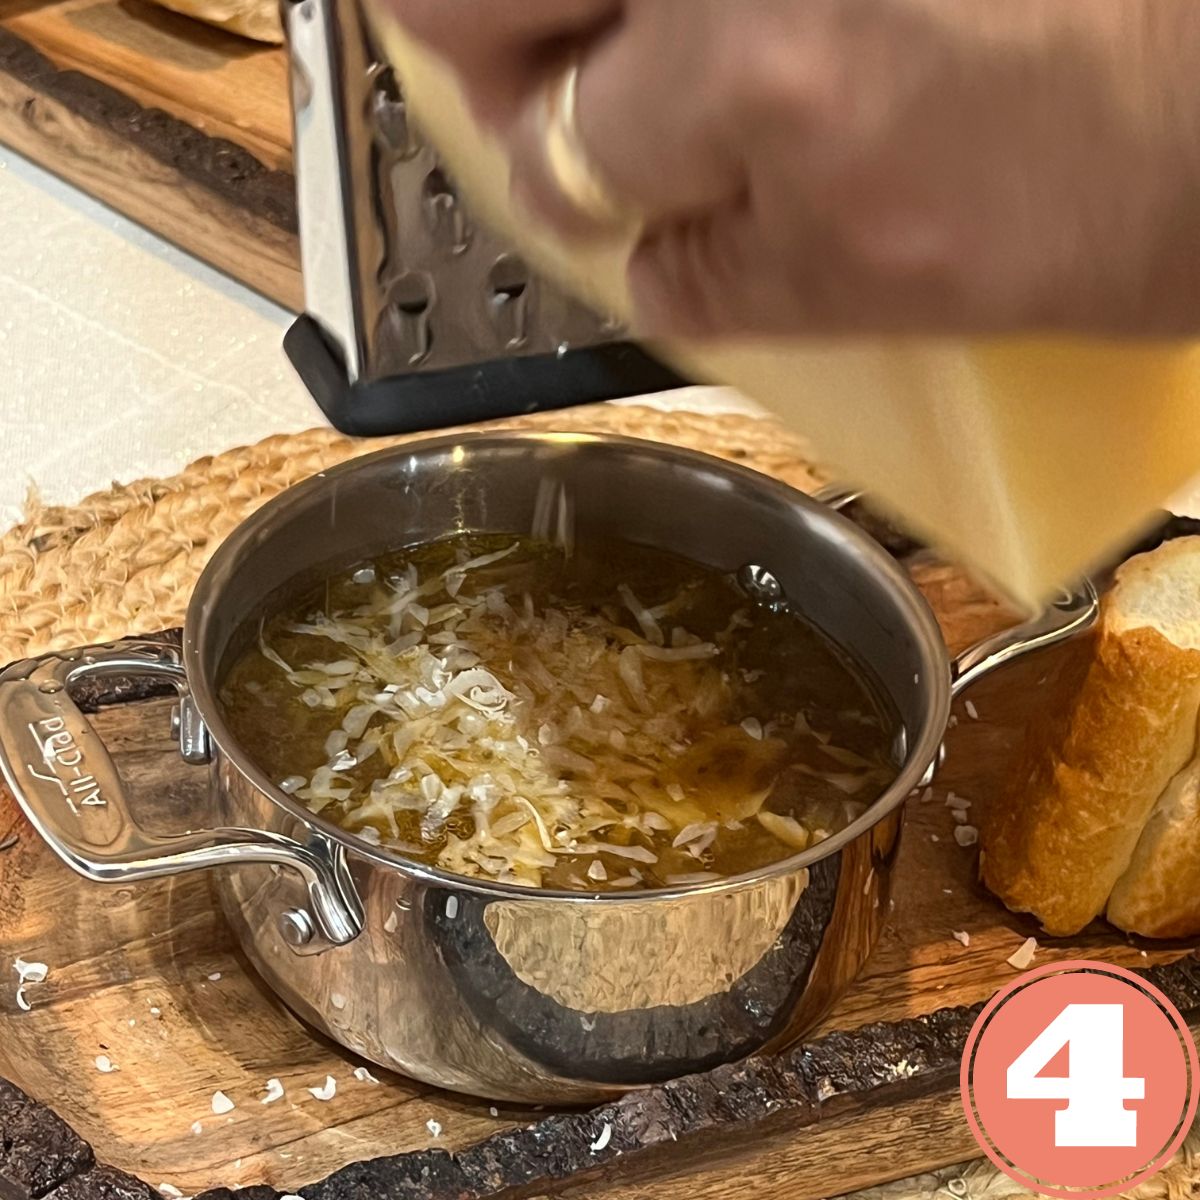 Parmesan cheese being grated into French onion soup